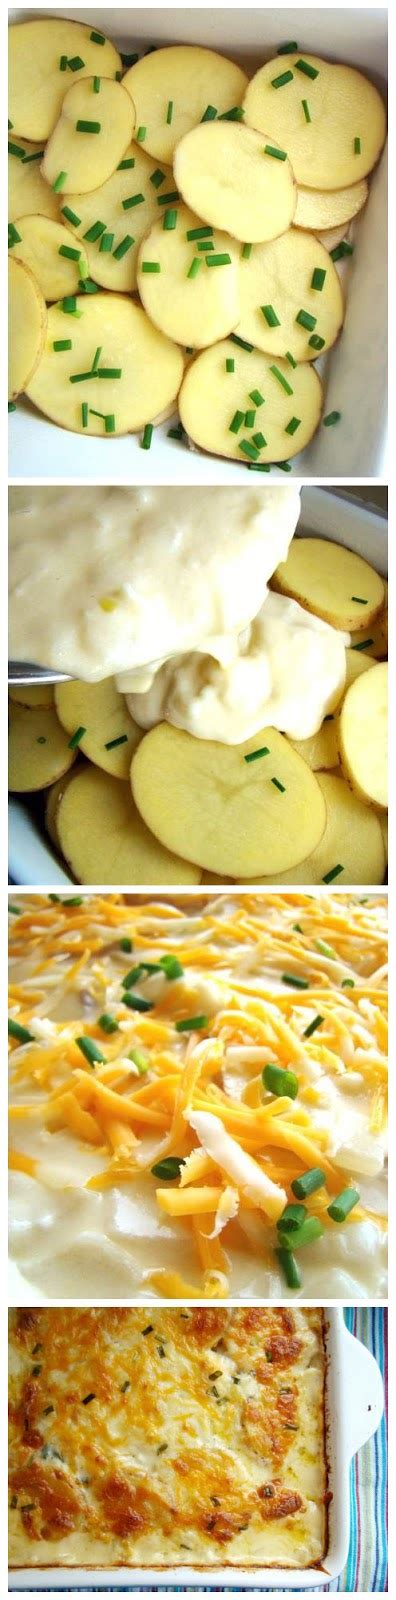 What can you add to make this dish uniquely your own? Cheesy Scalloped Potatoes Recipe | Quick & Easy Recipes